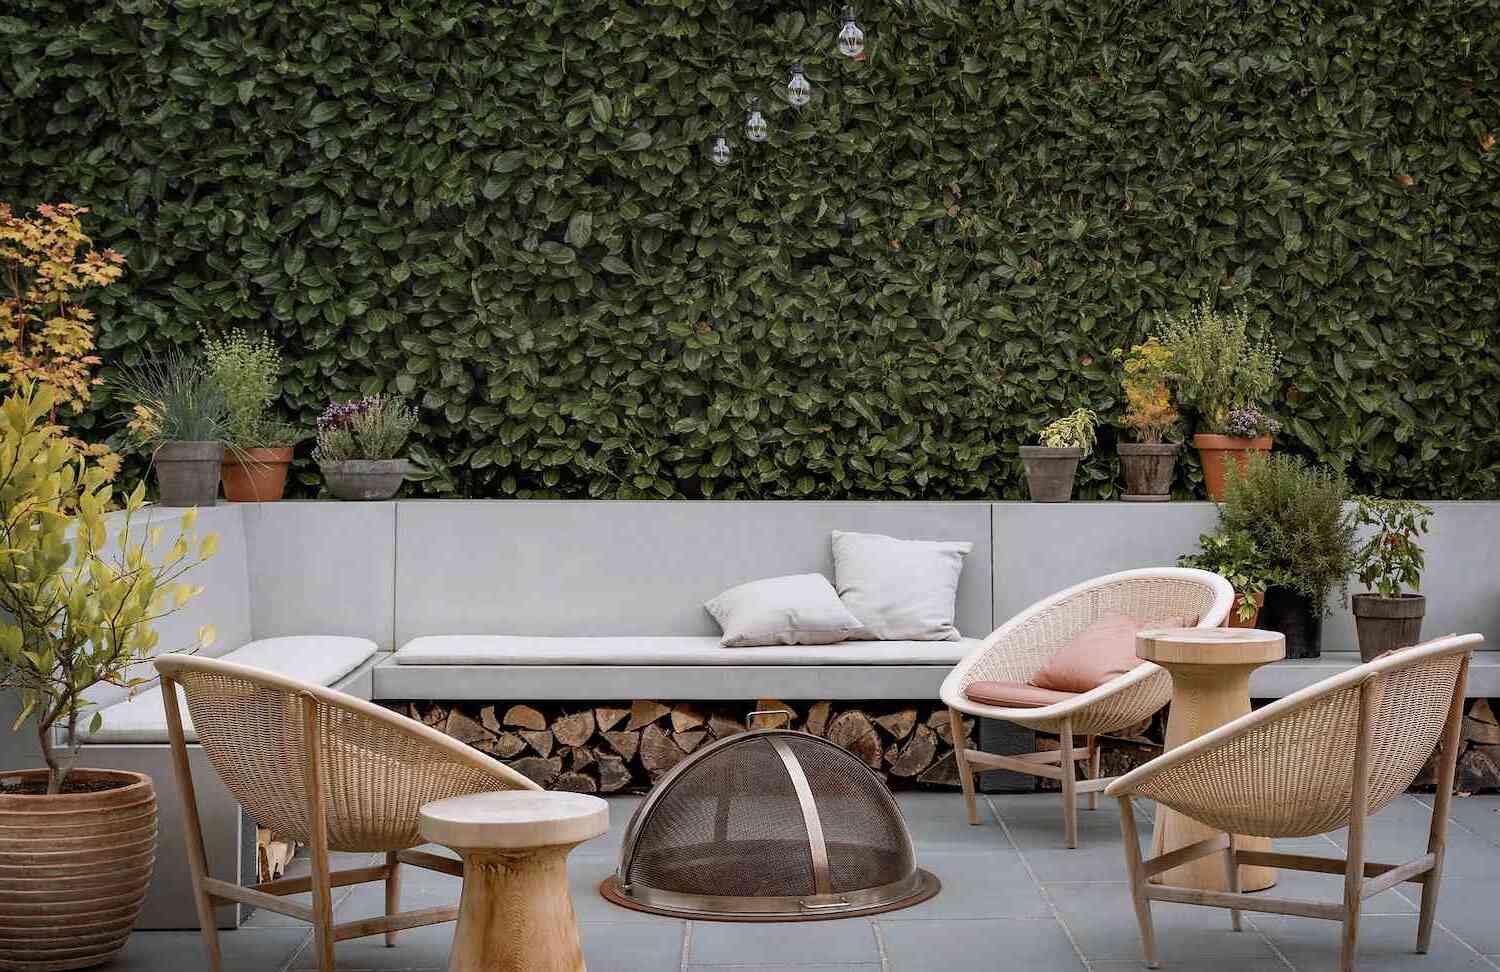 DIY Outdoor Furniture: Transform Your Patio With These Creative Projects